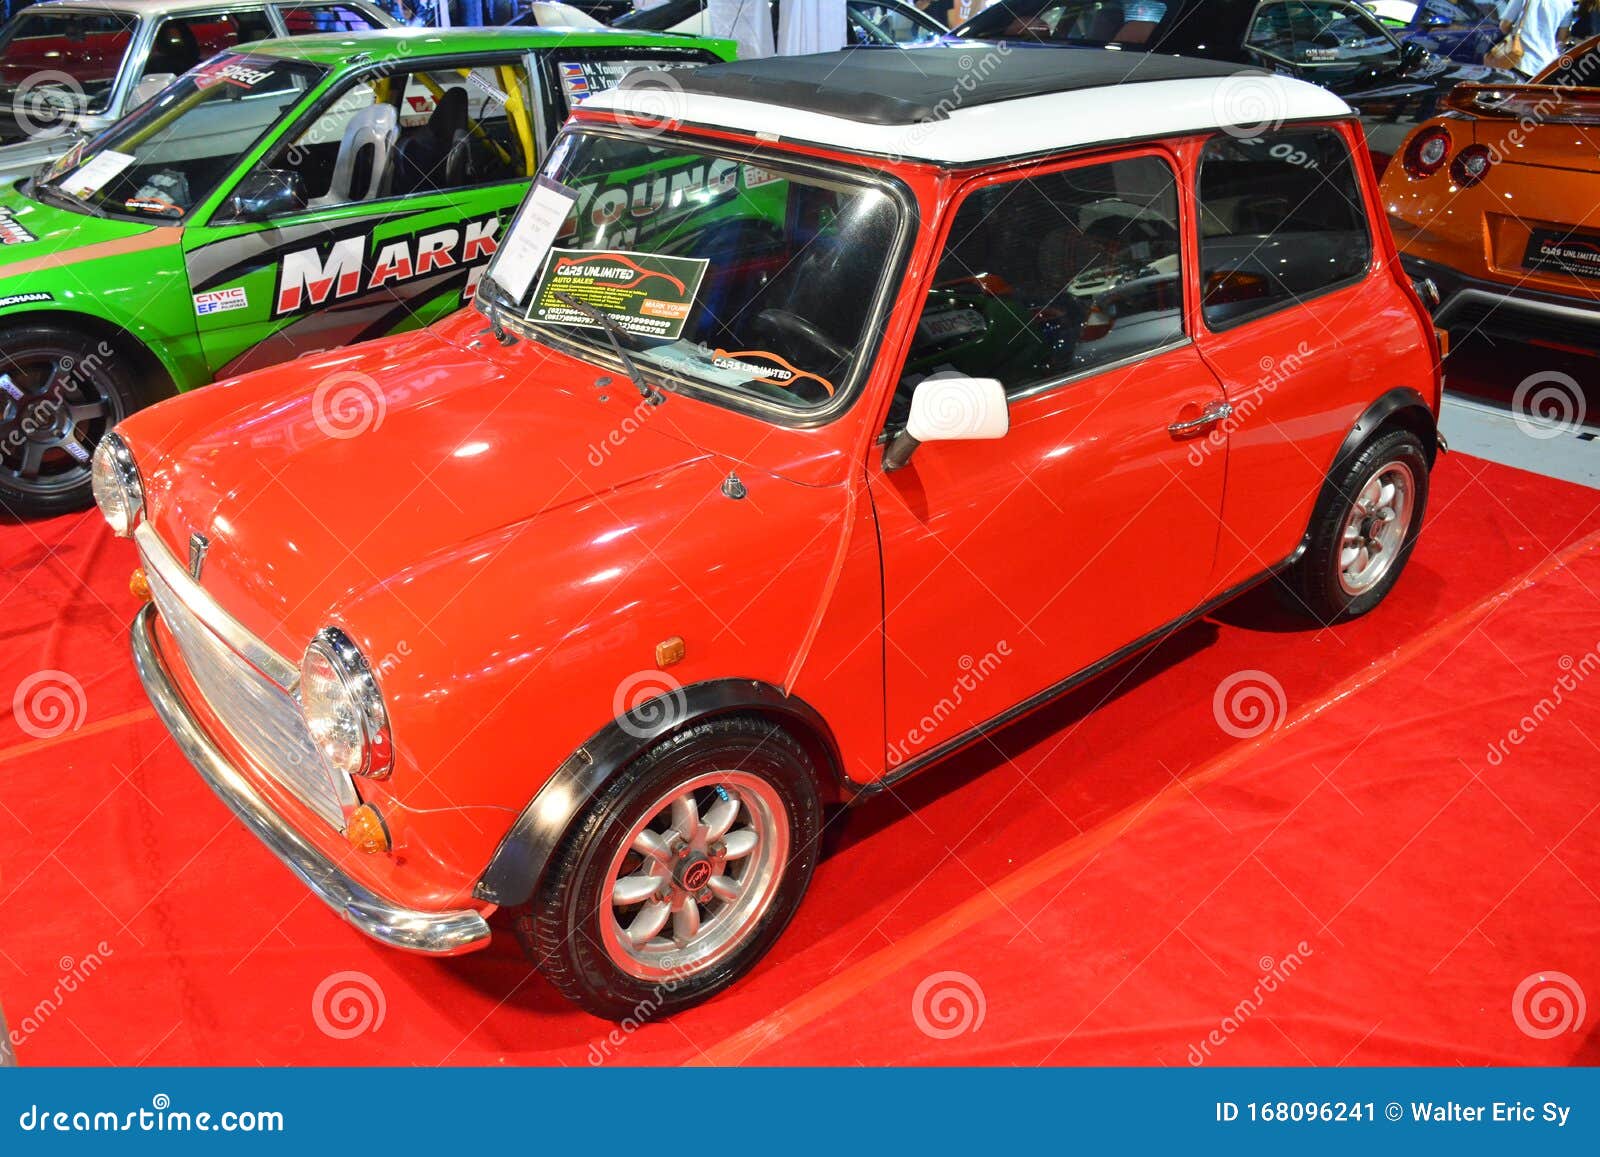 Red Mini Cooper Limited Mr Bean Editorial Photo Image Of Dealer Distributor